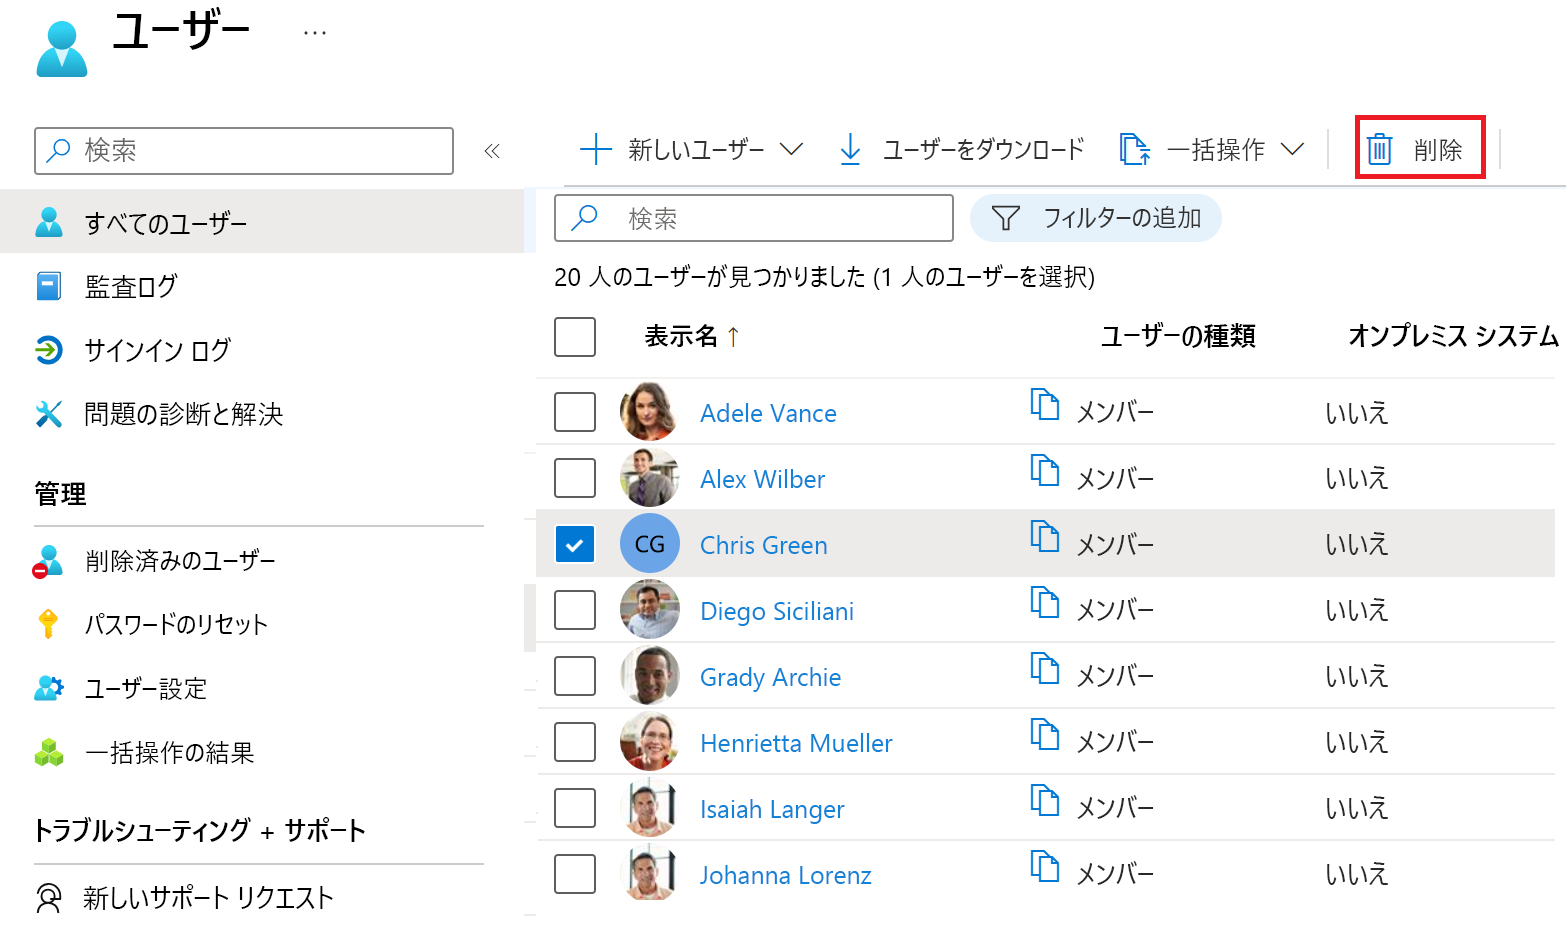 Screenshot of Microsoft Entra ID all users' list with one user check box selected and another check box highlighted indicating the ability to select multiple users from the list.